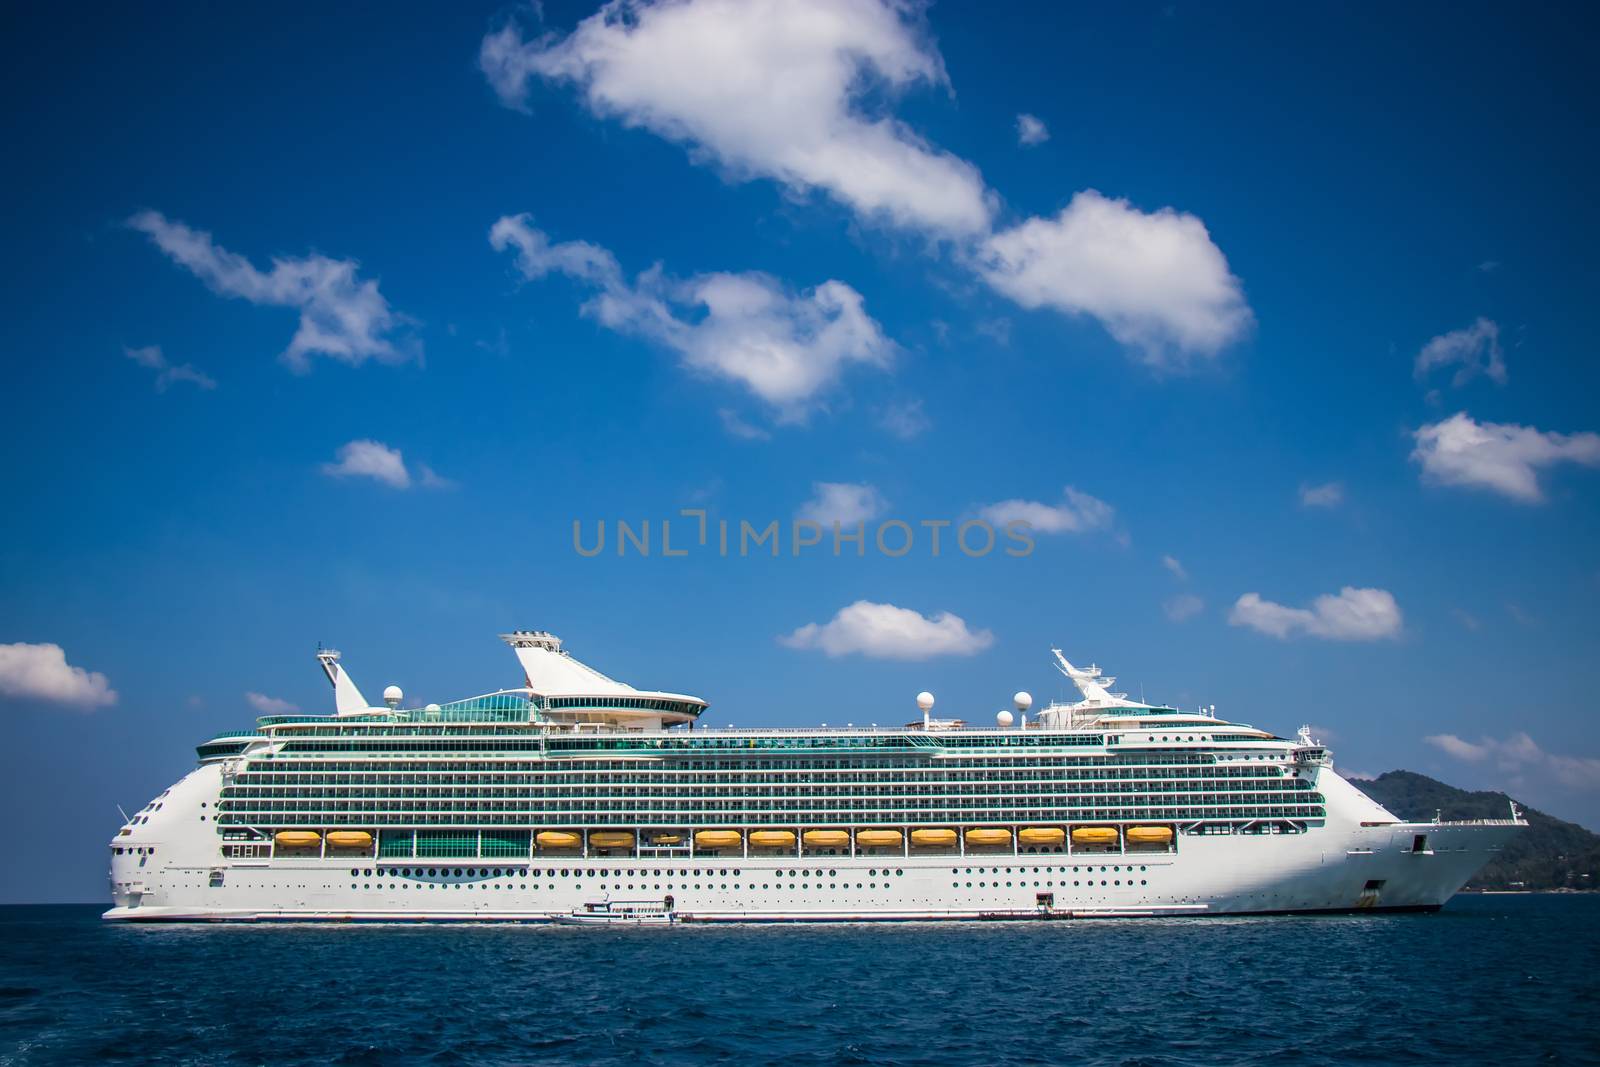 Luxury cruise ship sailing from port. Big cruise ship in the sea with beautiful blue sky background. Beautiful summer seascape poster for advertise. Holiday vacation lifestyle on cruise.